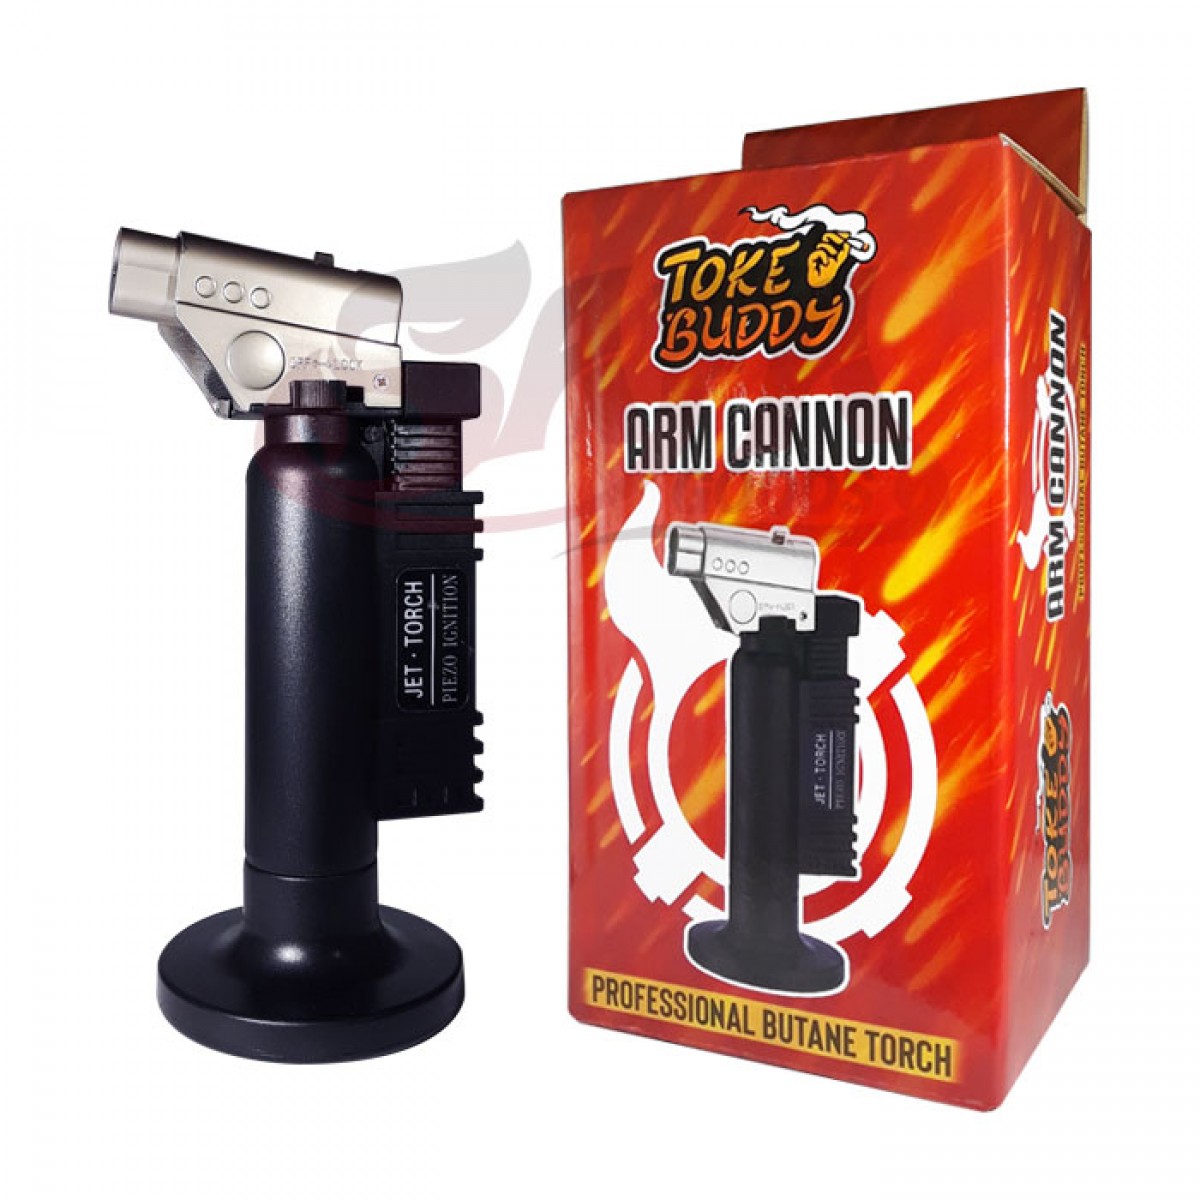 Toke Buddy Torches - Arm Cannon